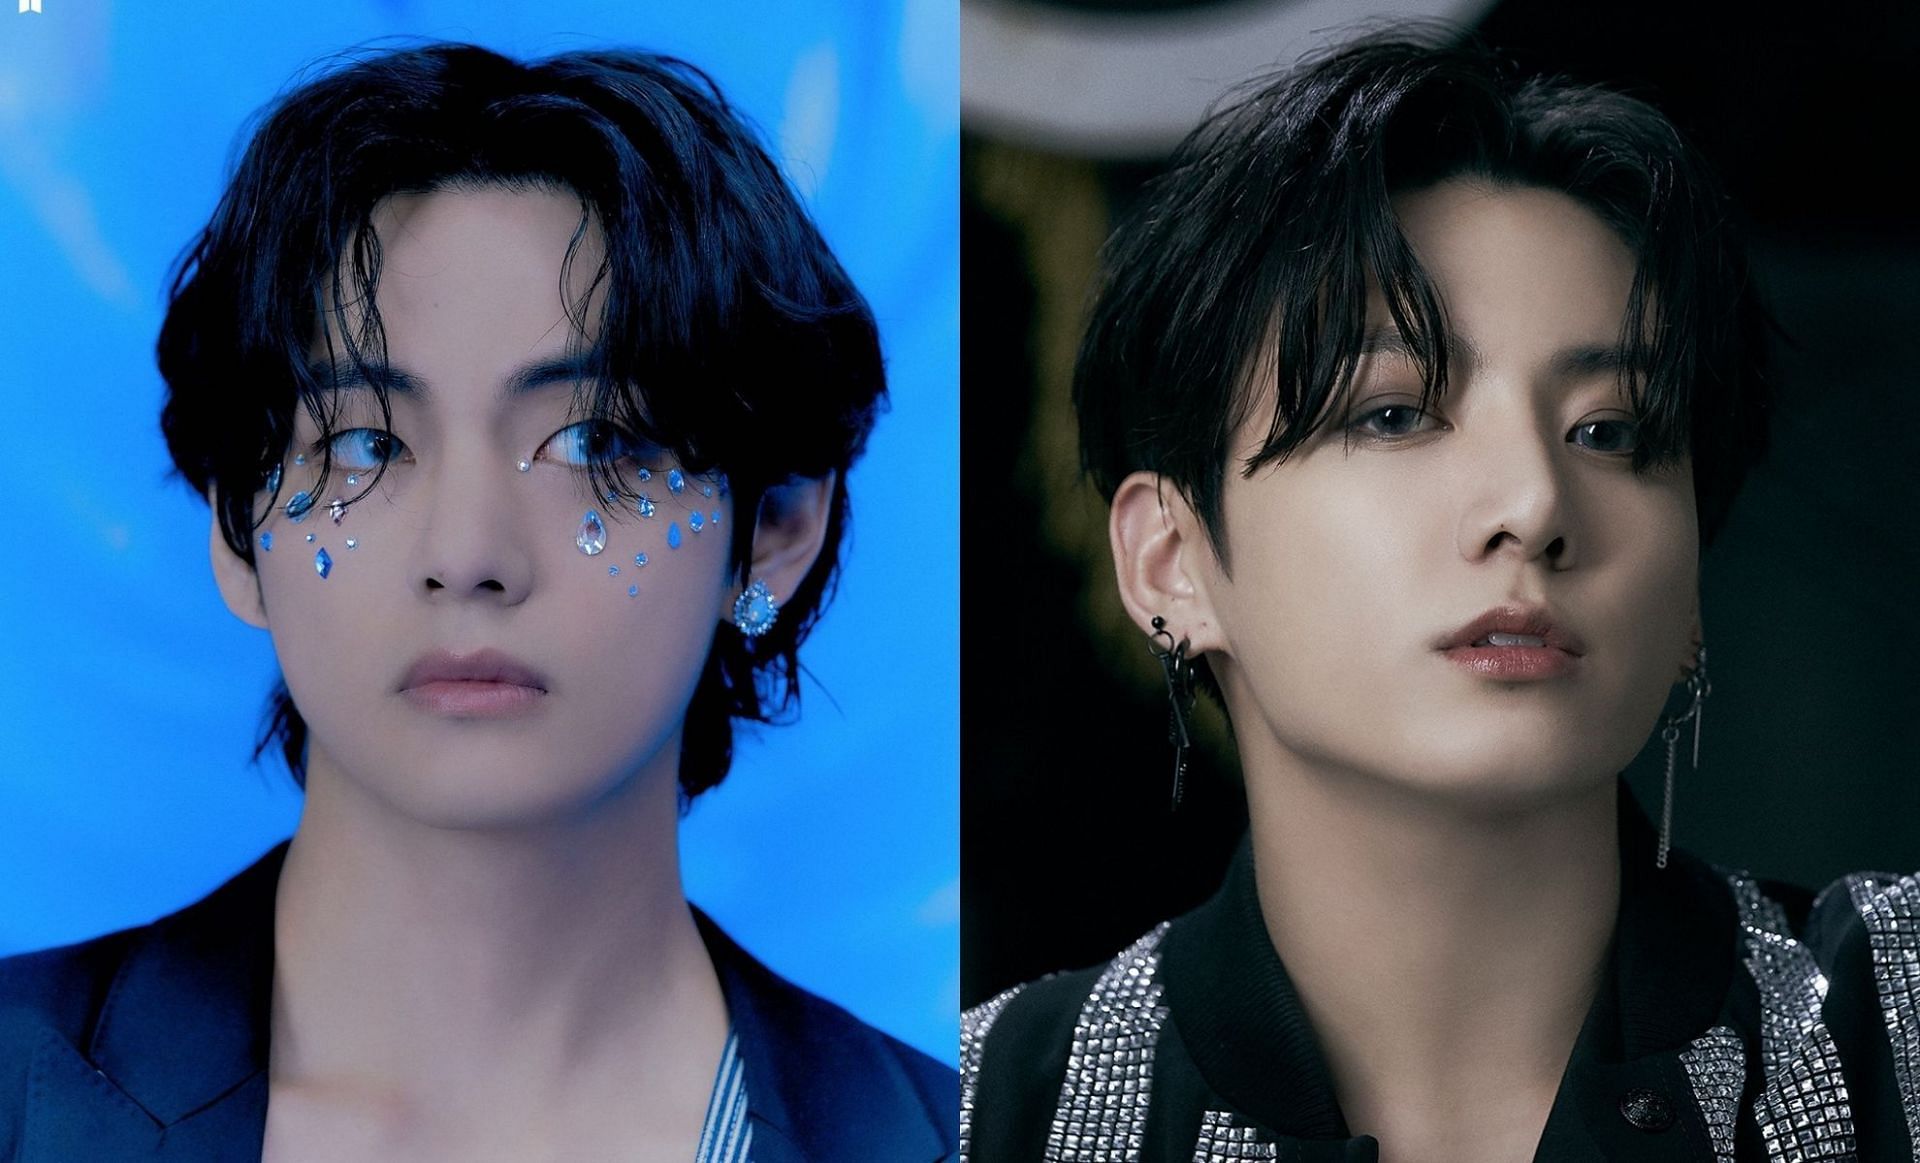 BTS&#039; V and Jungkook &#039;Map of the Soul ON:E Concept Photobook&#039; Preview Cuts (Images via @bts_bighit/Twitter)